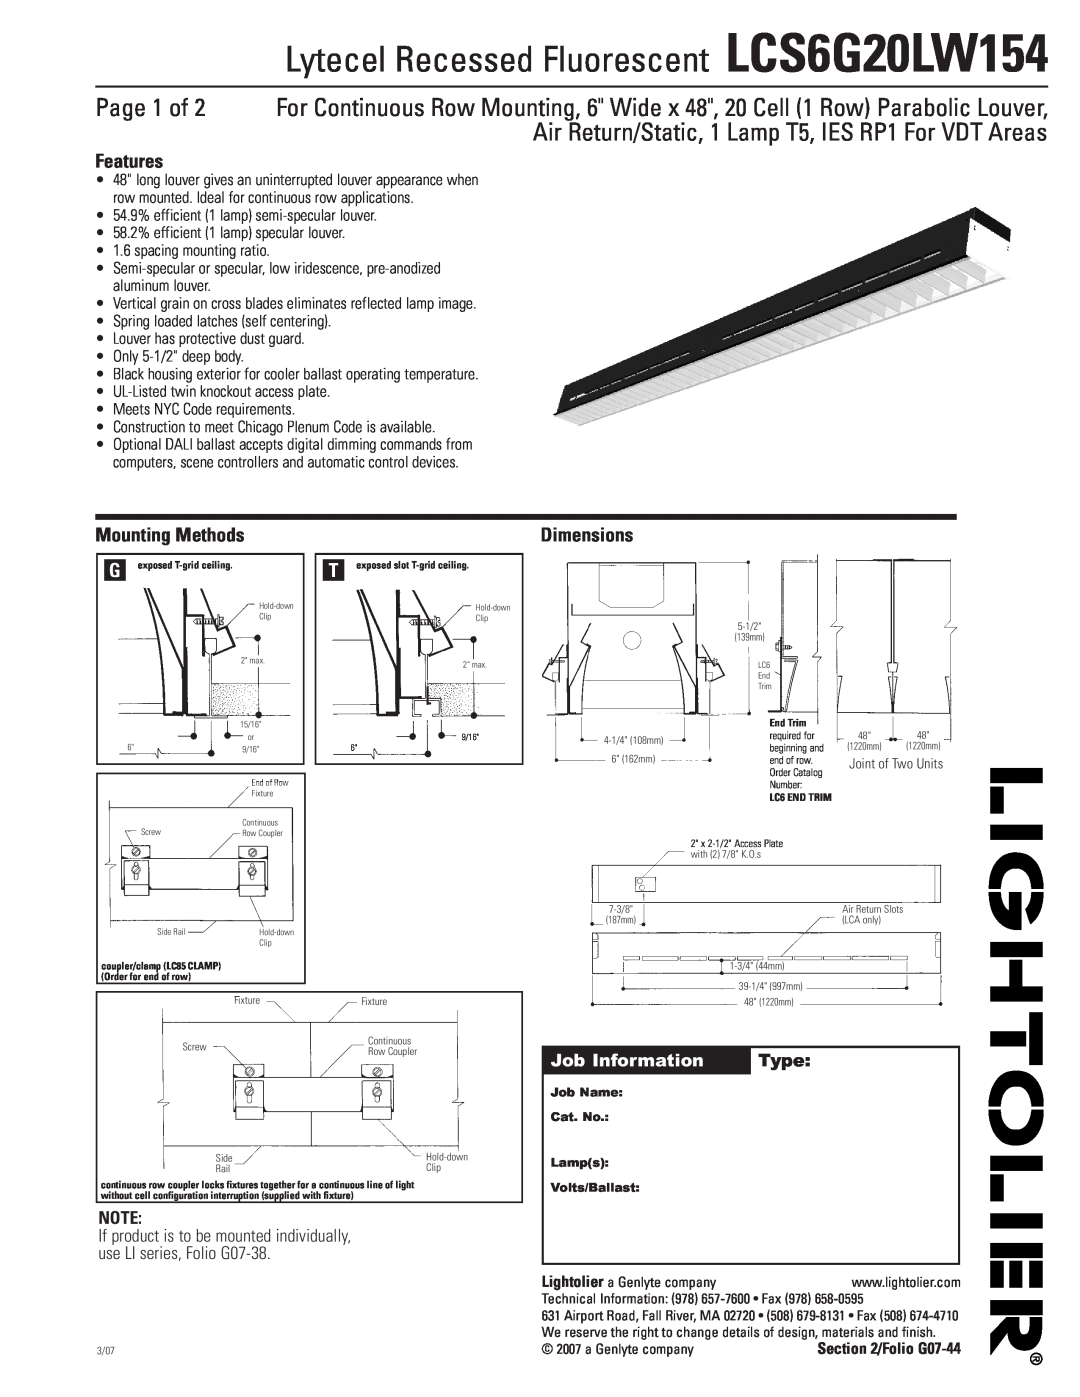 Lightolier dimensions Lytecel Recessed Fluorescent LCS6G20LW154, Features, Mounting Methods, Dimensions, Type 